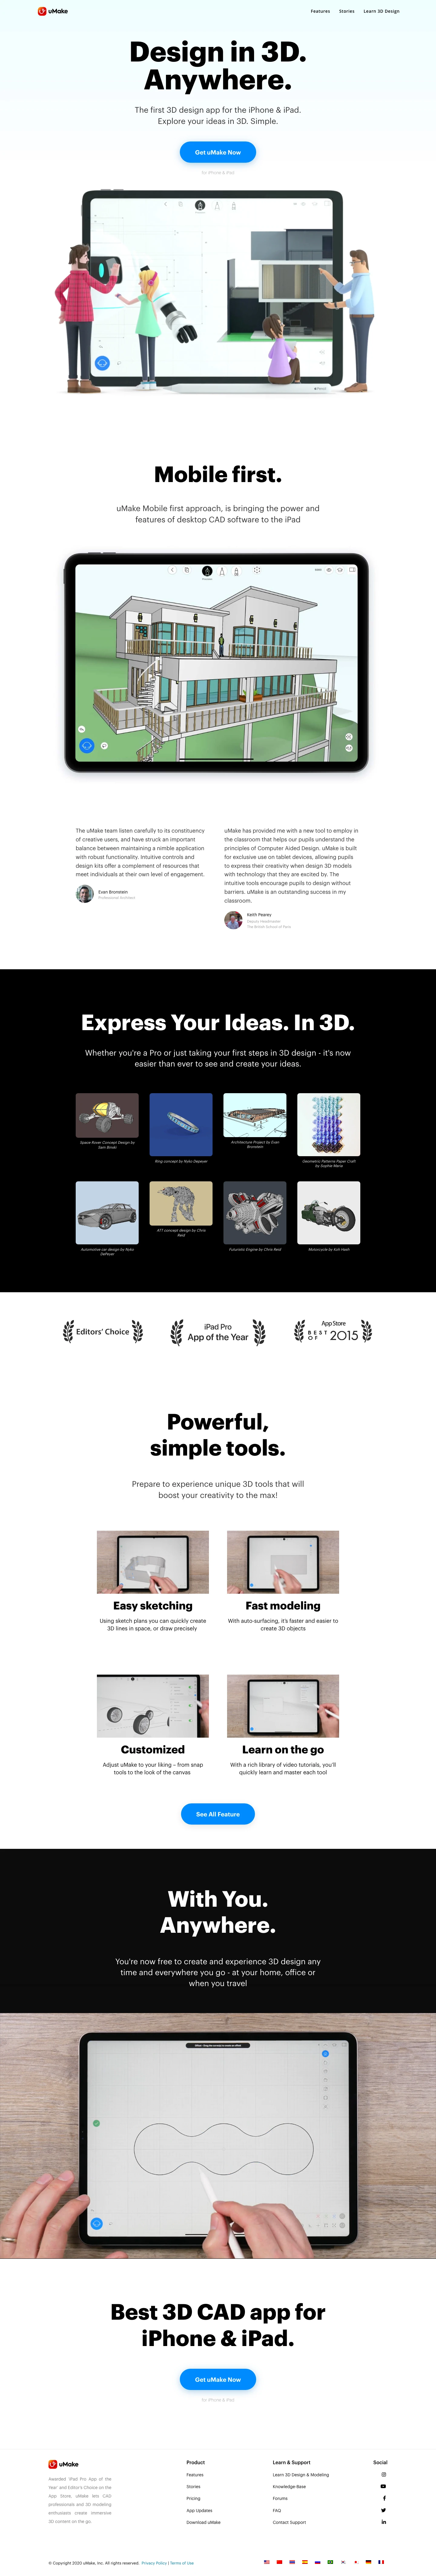 uMake Landing Page Example: uMake is the first 3D design app for the iPad. uMake is a mobile-first CAD app that makes 3D modeling faster and easier than ever. Created for Engineerings, Architects, Graphic Designers, Makers, Hobbyists and Students for conceptual design & 3D Printing.